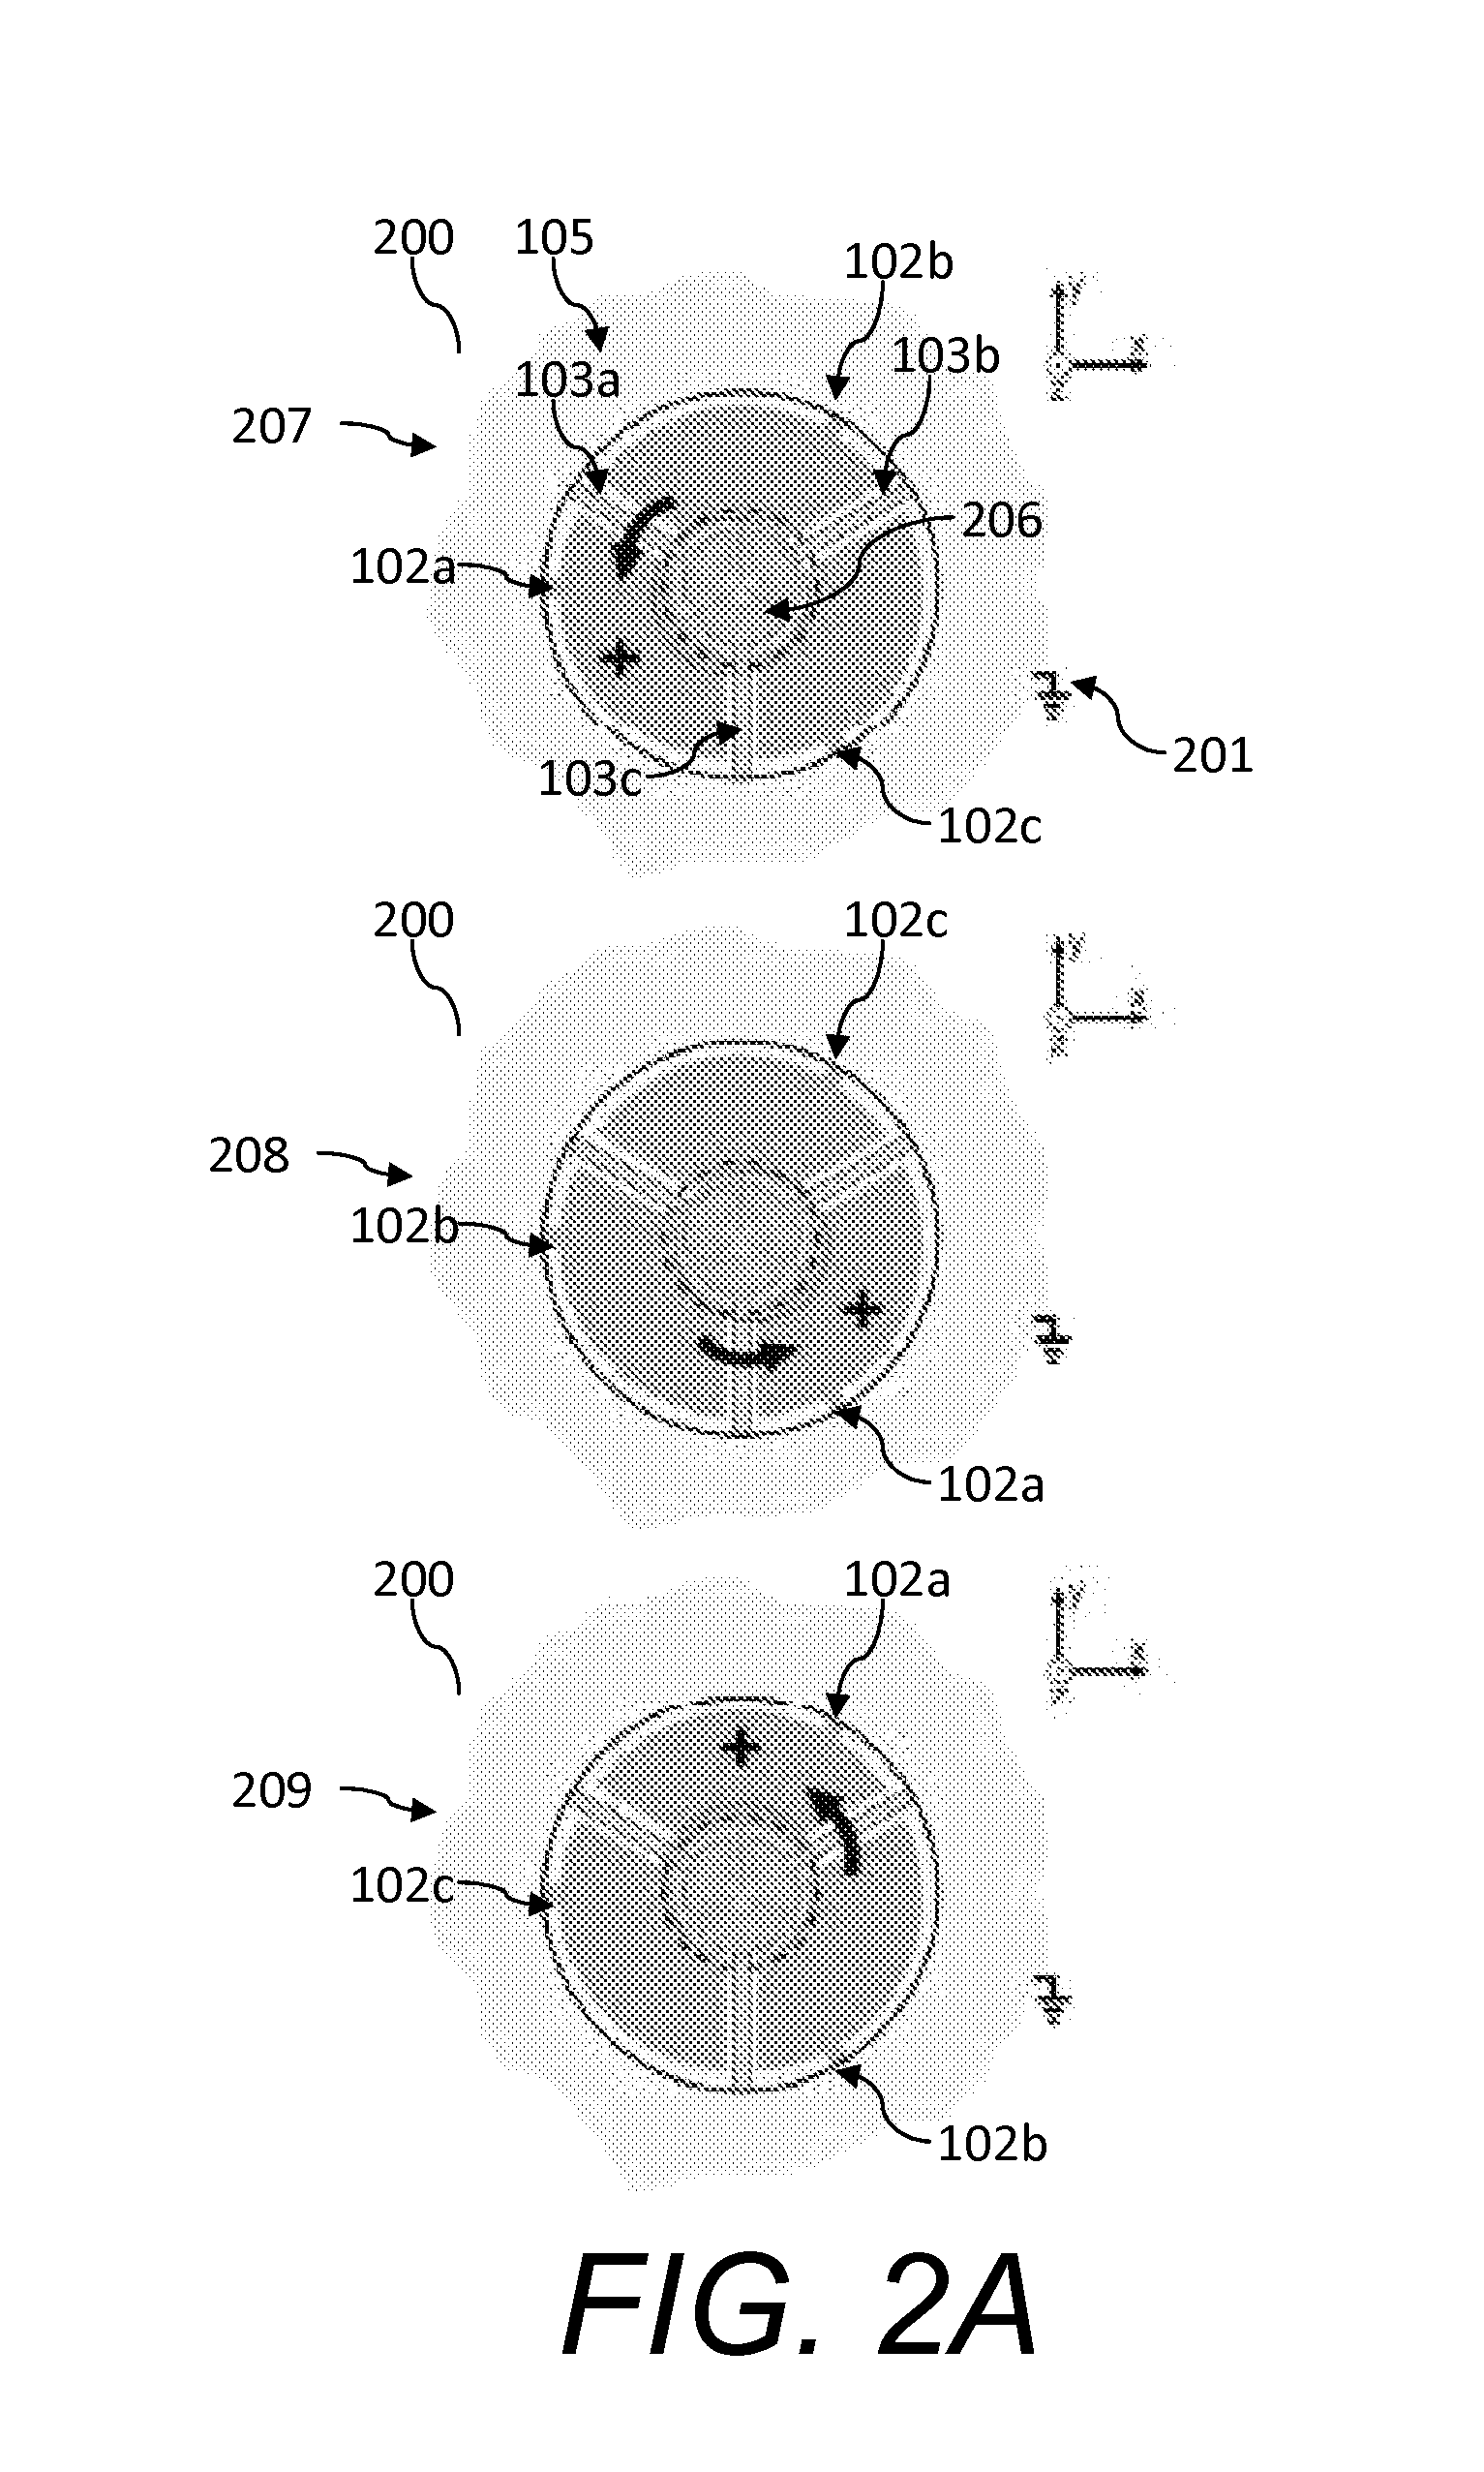 Membrane-Based Nano-Electromechanical Systems Device And Methods To Make And Use Same